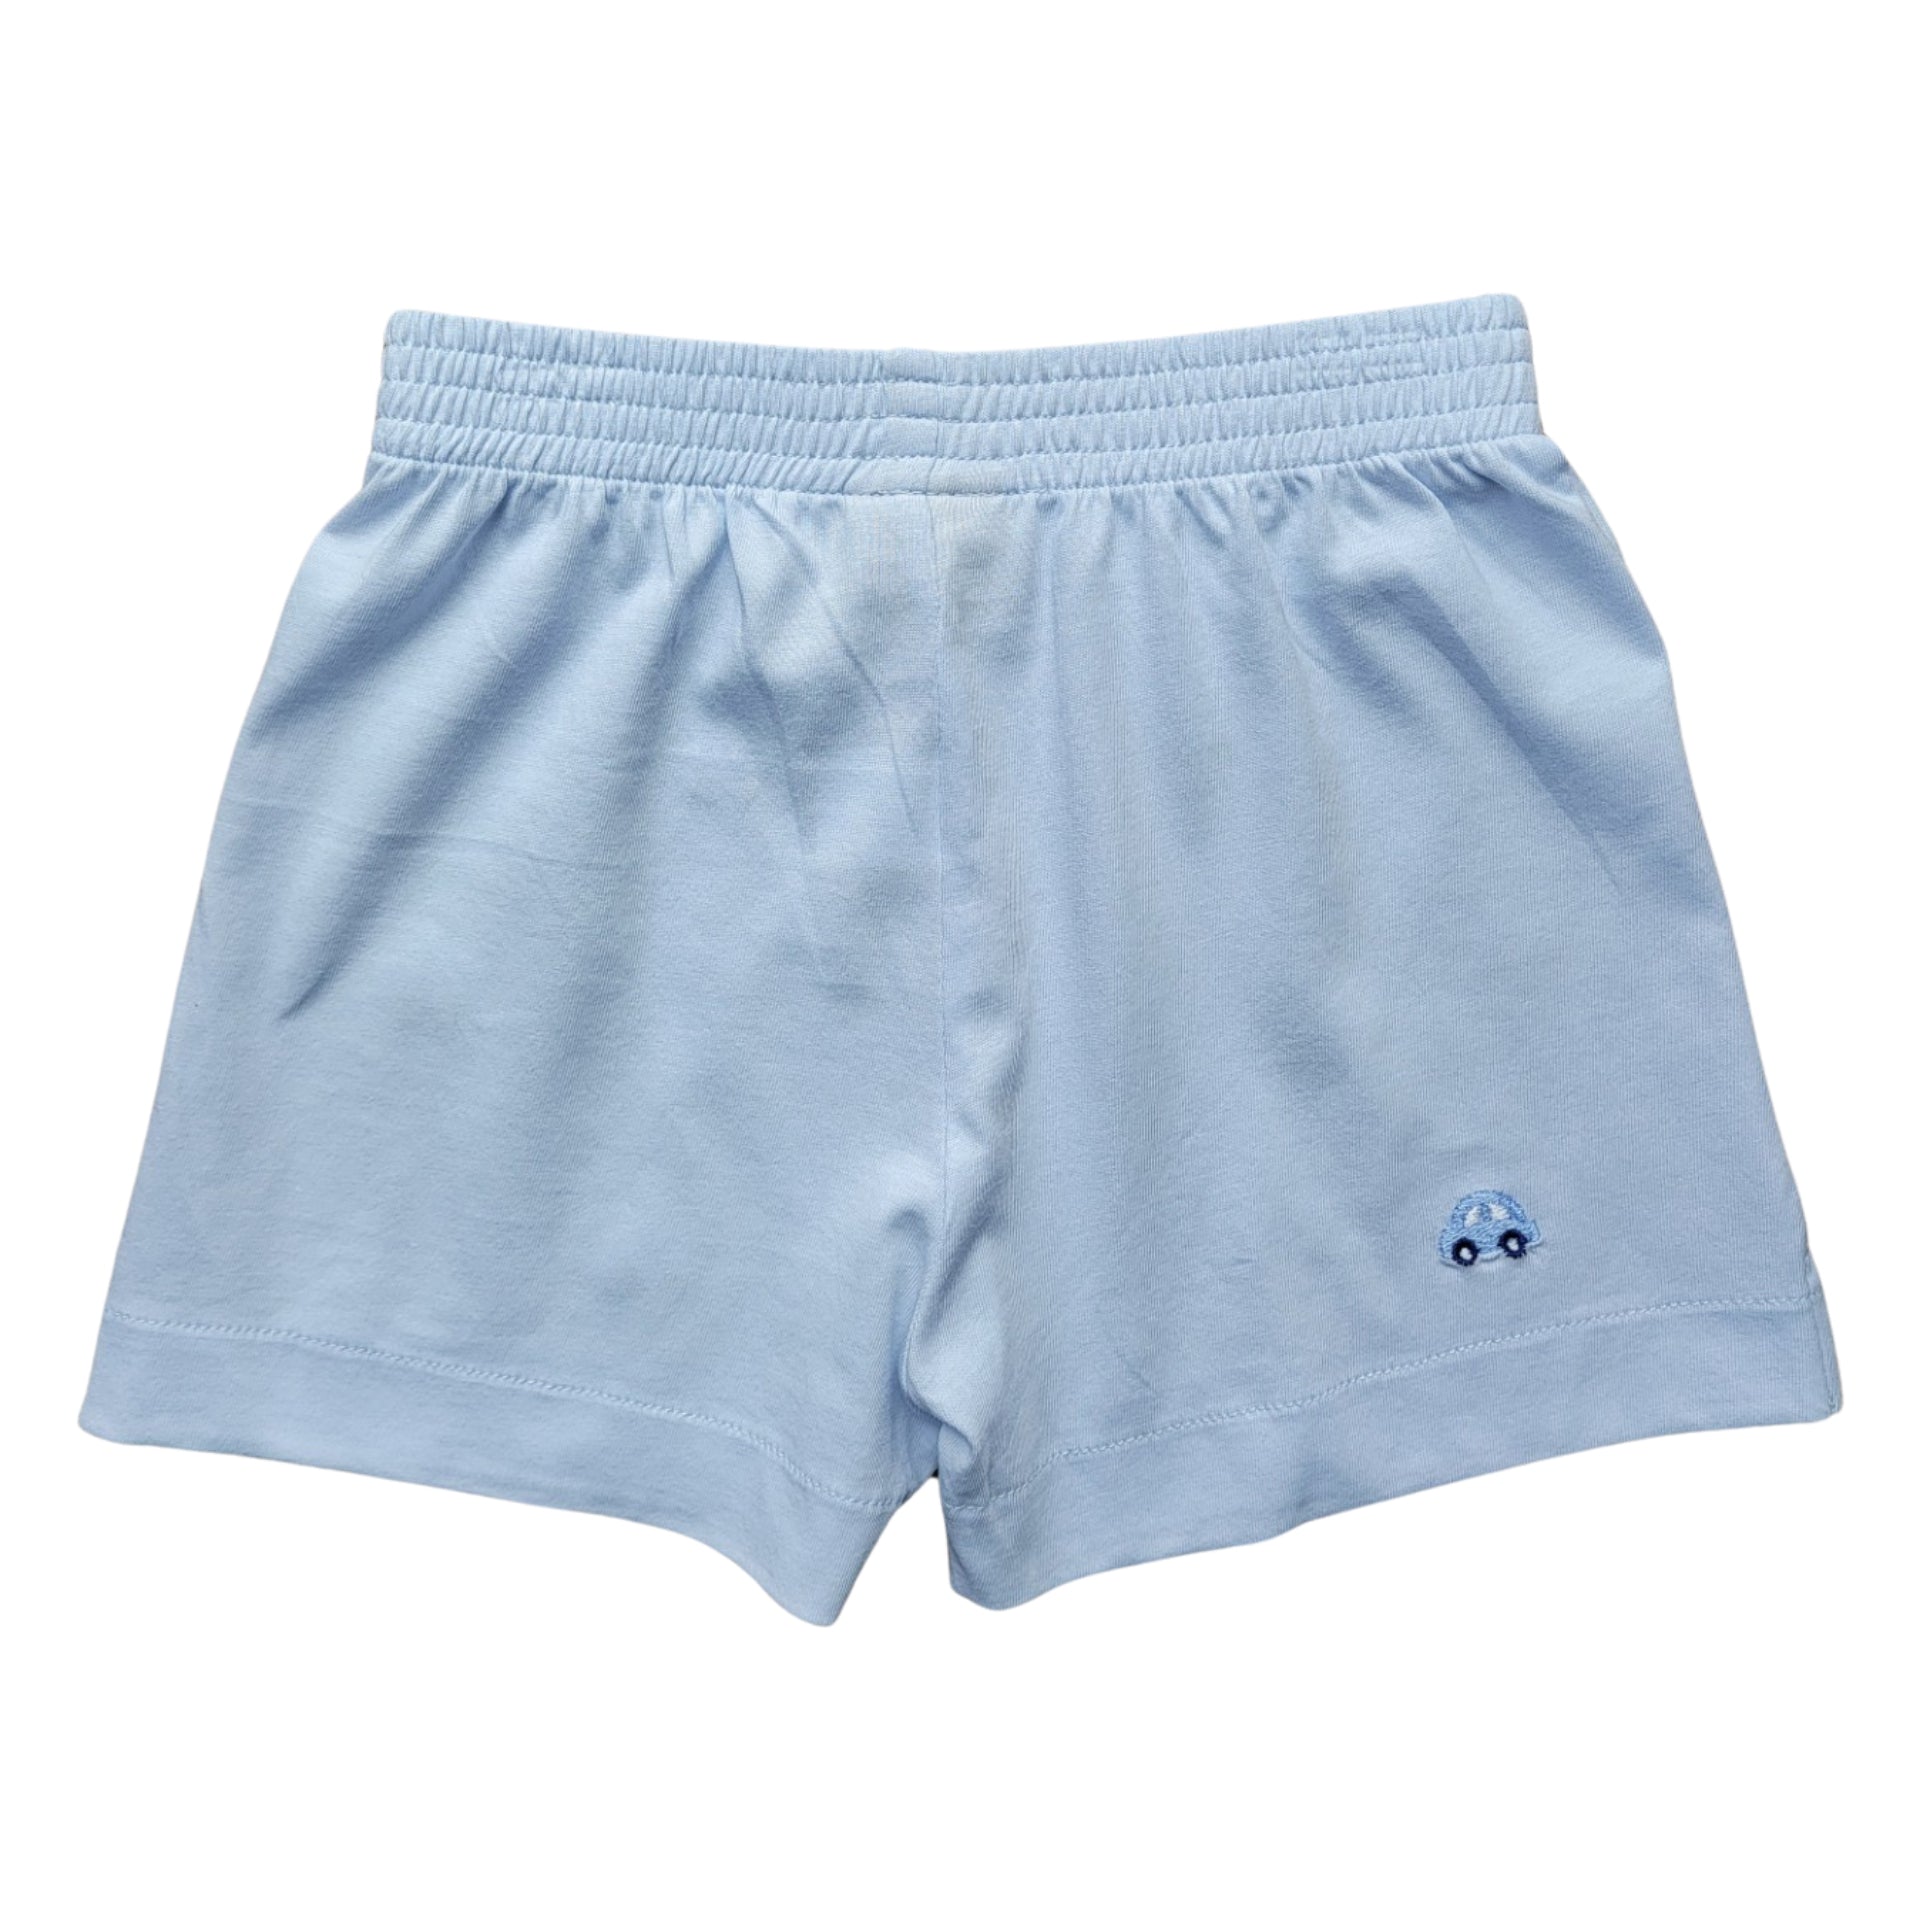 Boy Cotton Play Shorts, Baby Blue with Embroidered Blue Cars 